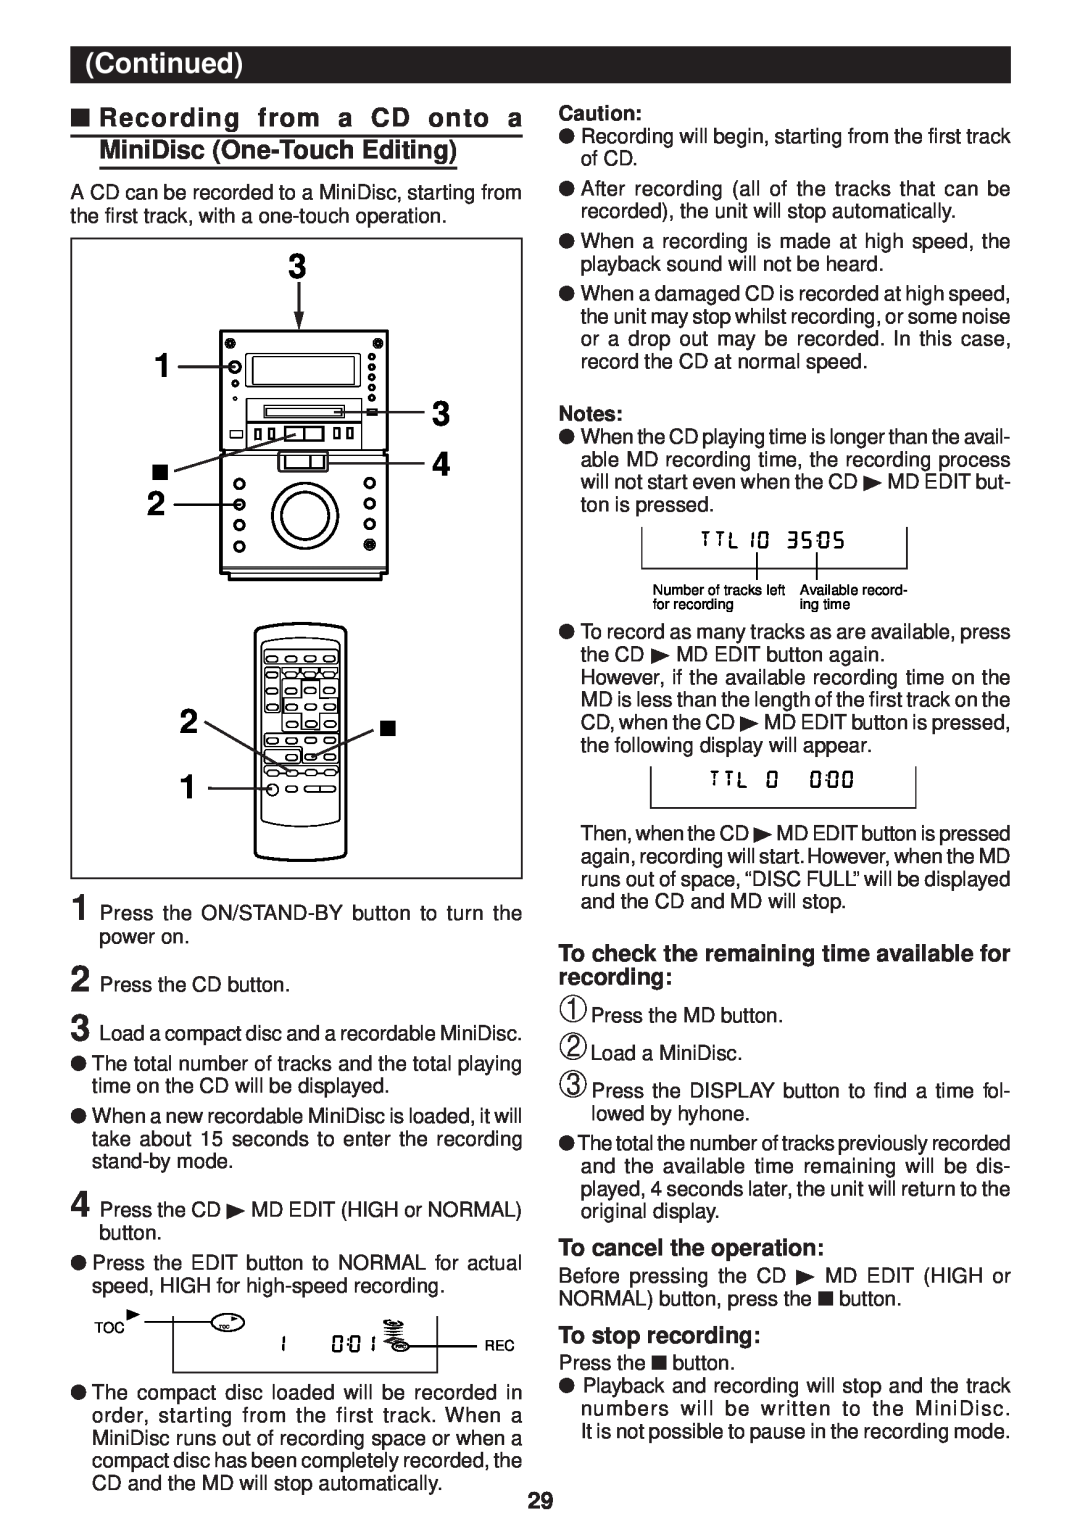 Sharp MD-M3H operation manual 2 2H, To cancel the operation, To stop recording, Continued 